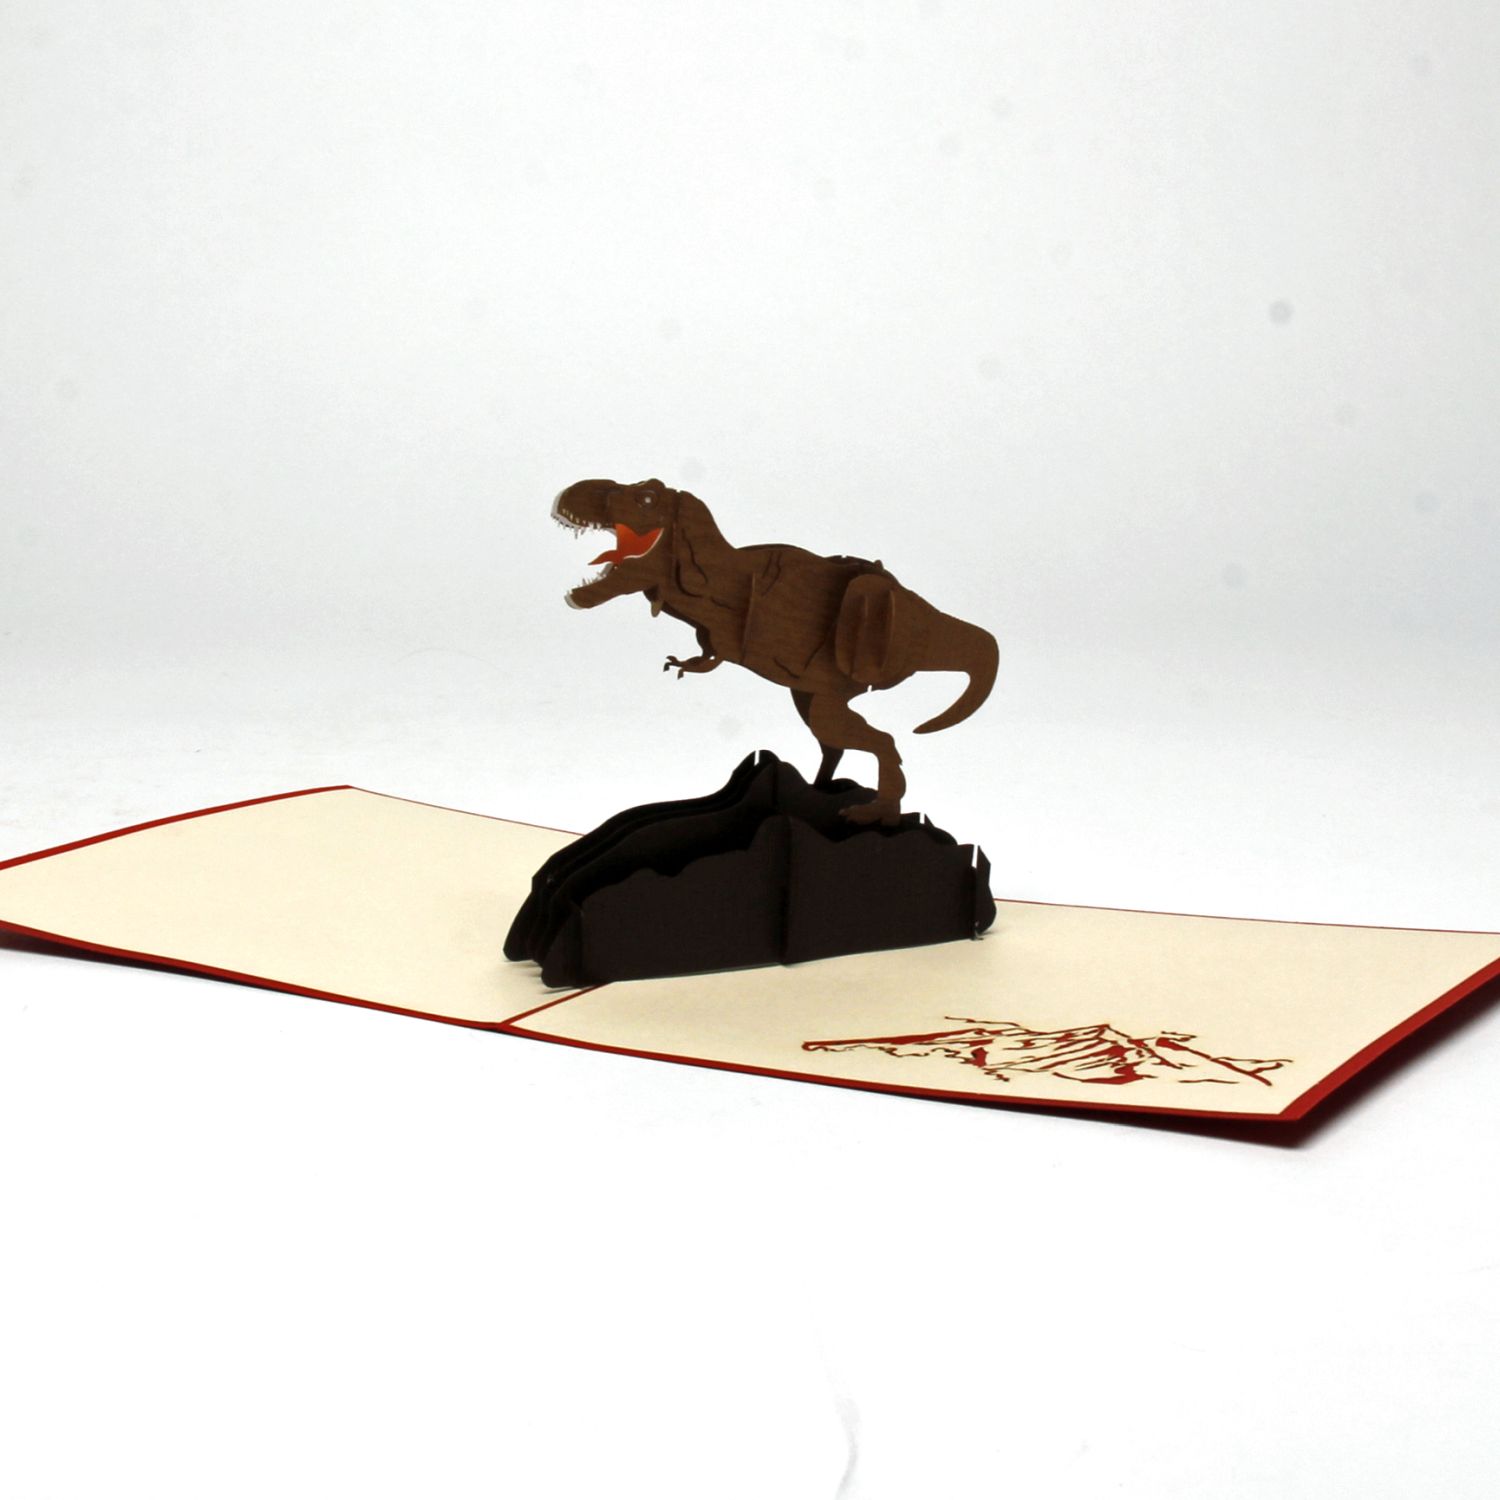 Roses without Thorns: Dinosaur Product Image 4 of 4